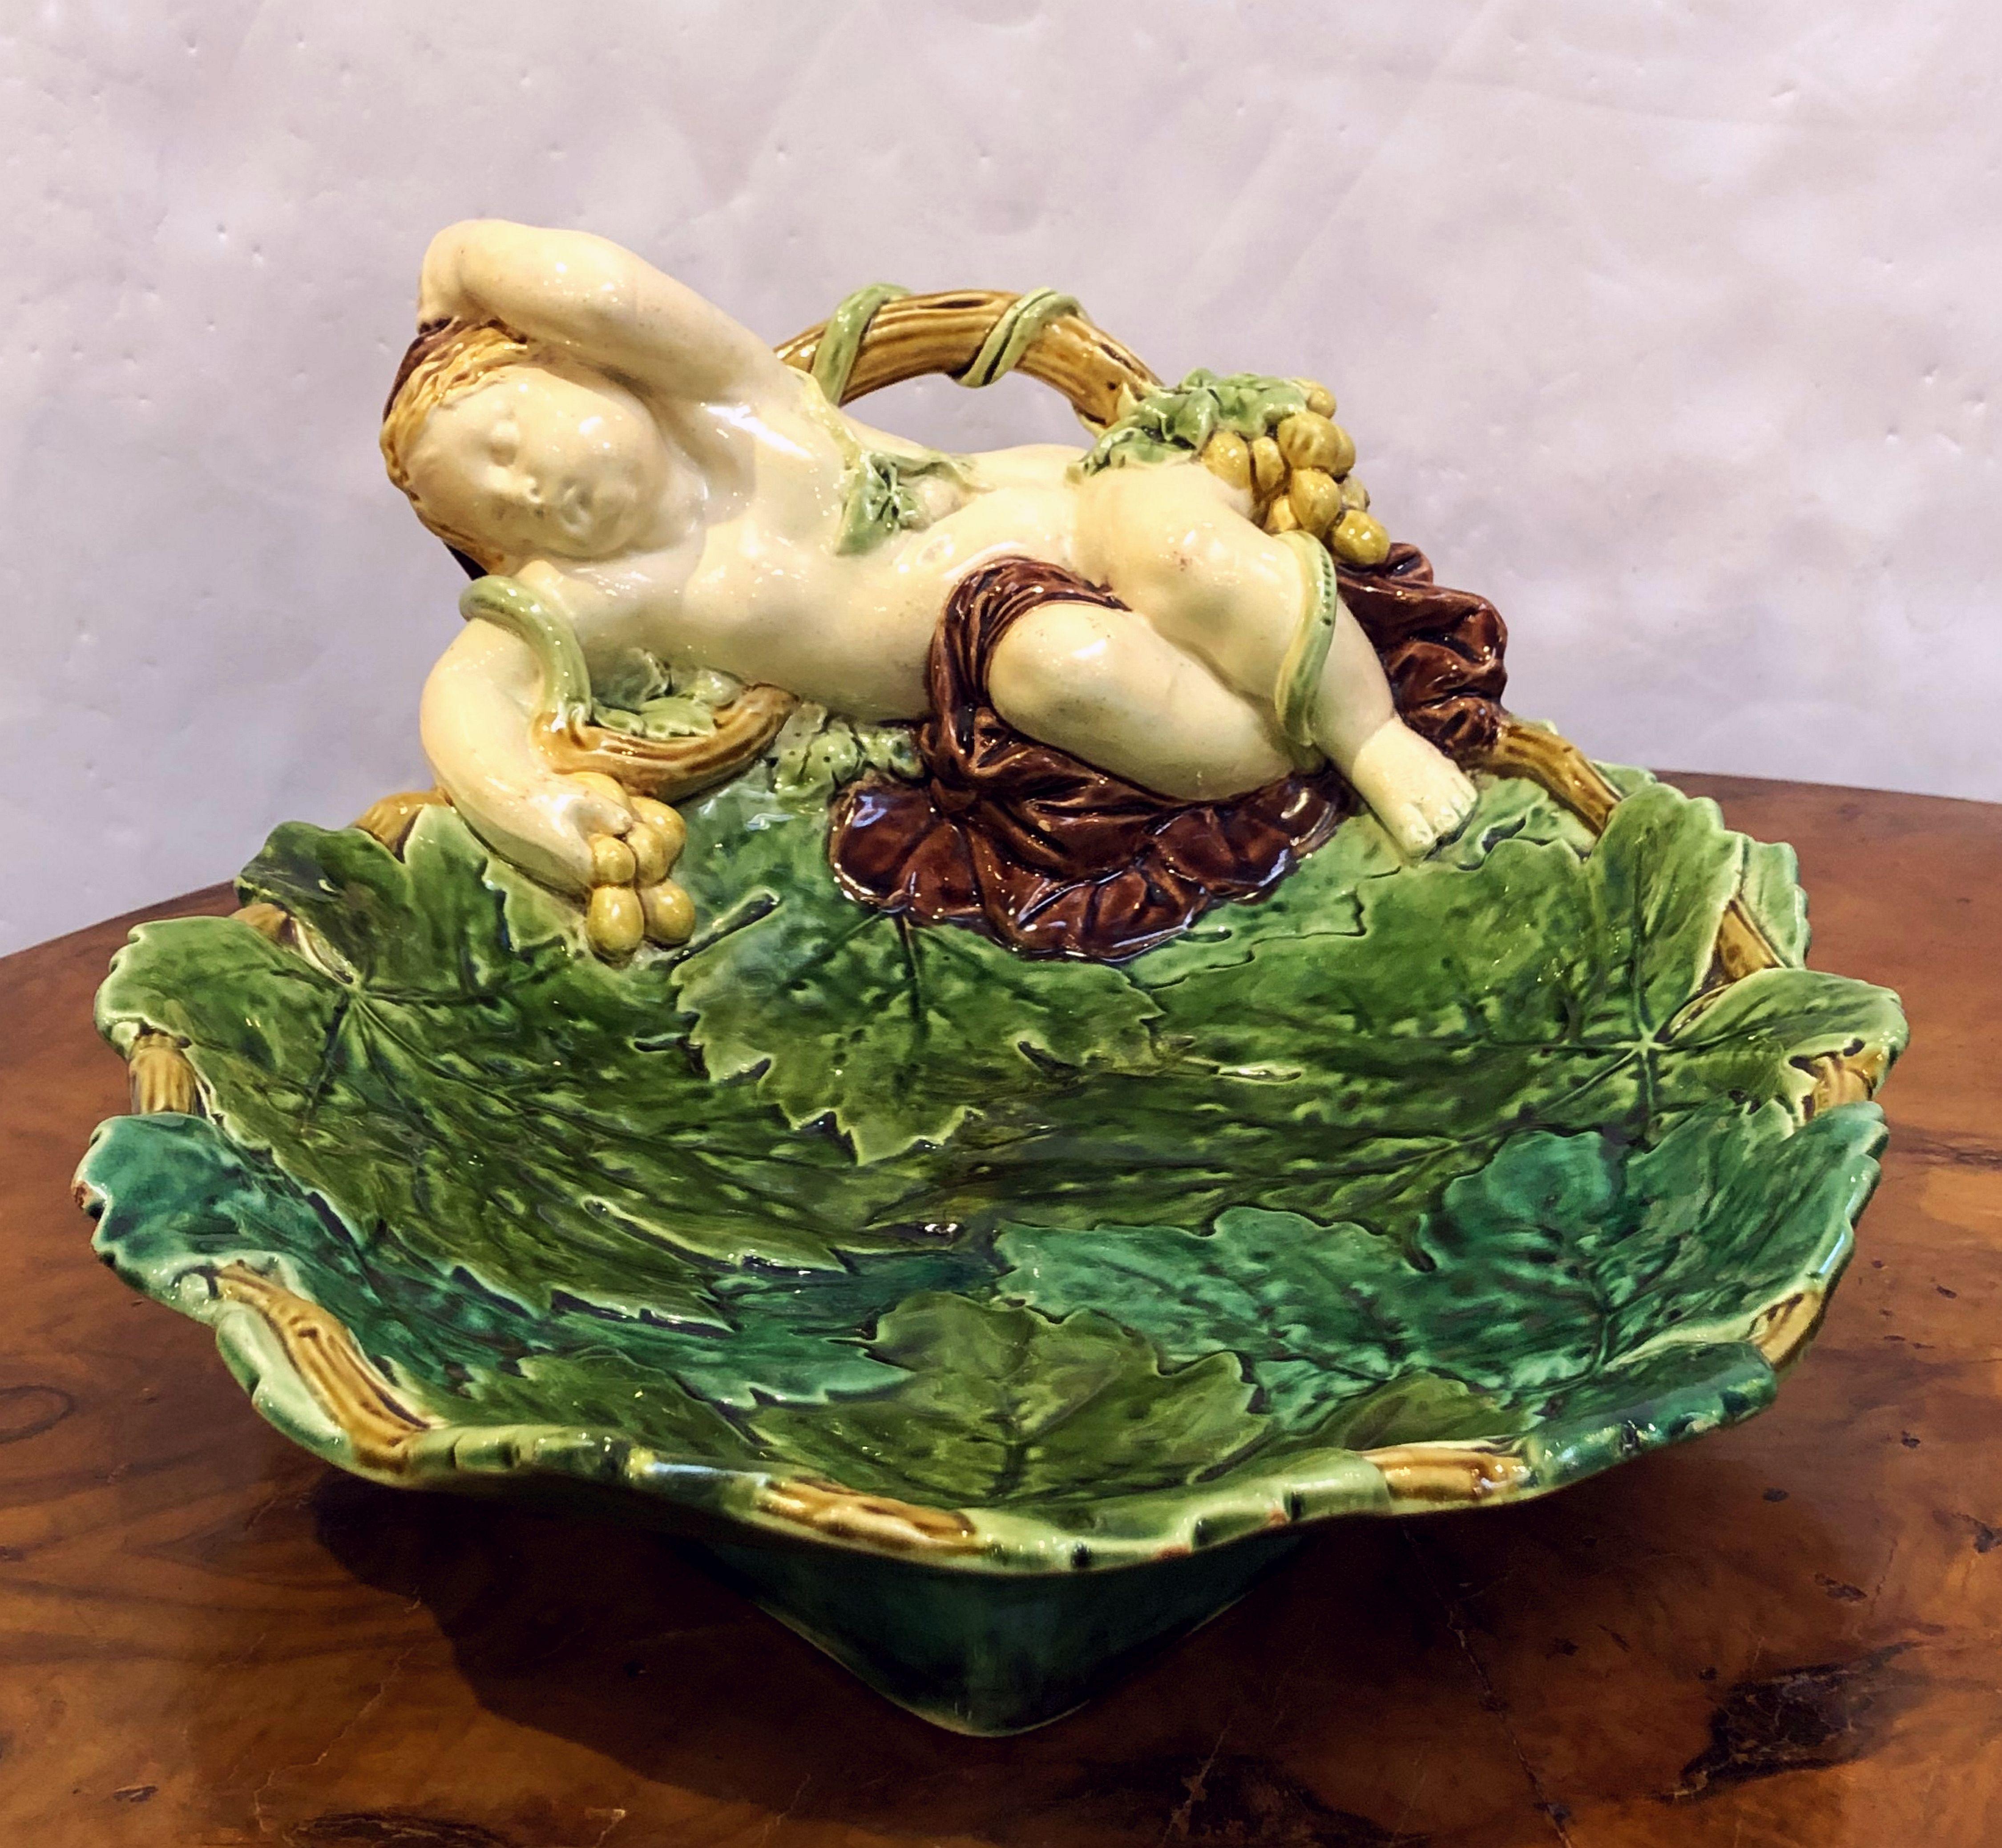 A fine Majolica serving platter or bowl by the celebrated English pottery firm, Minton.
Featuring a design of a recumbent cherub or child clutching grapes upon a bed of grape leaves. 
Impressed registration and makers marks on the base.